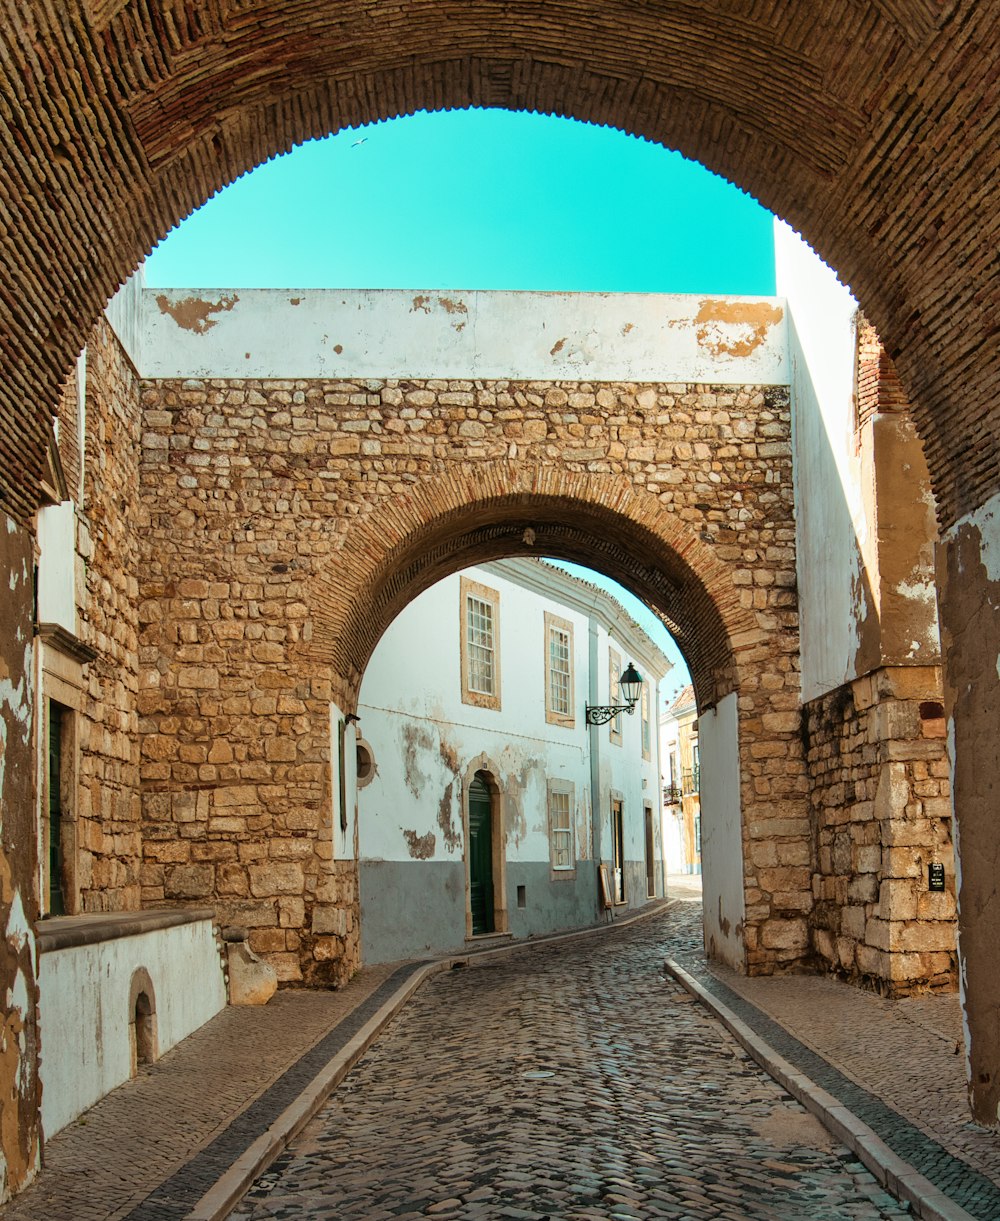 a cobblestone street with an arch in the middle